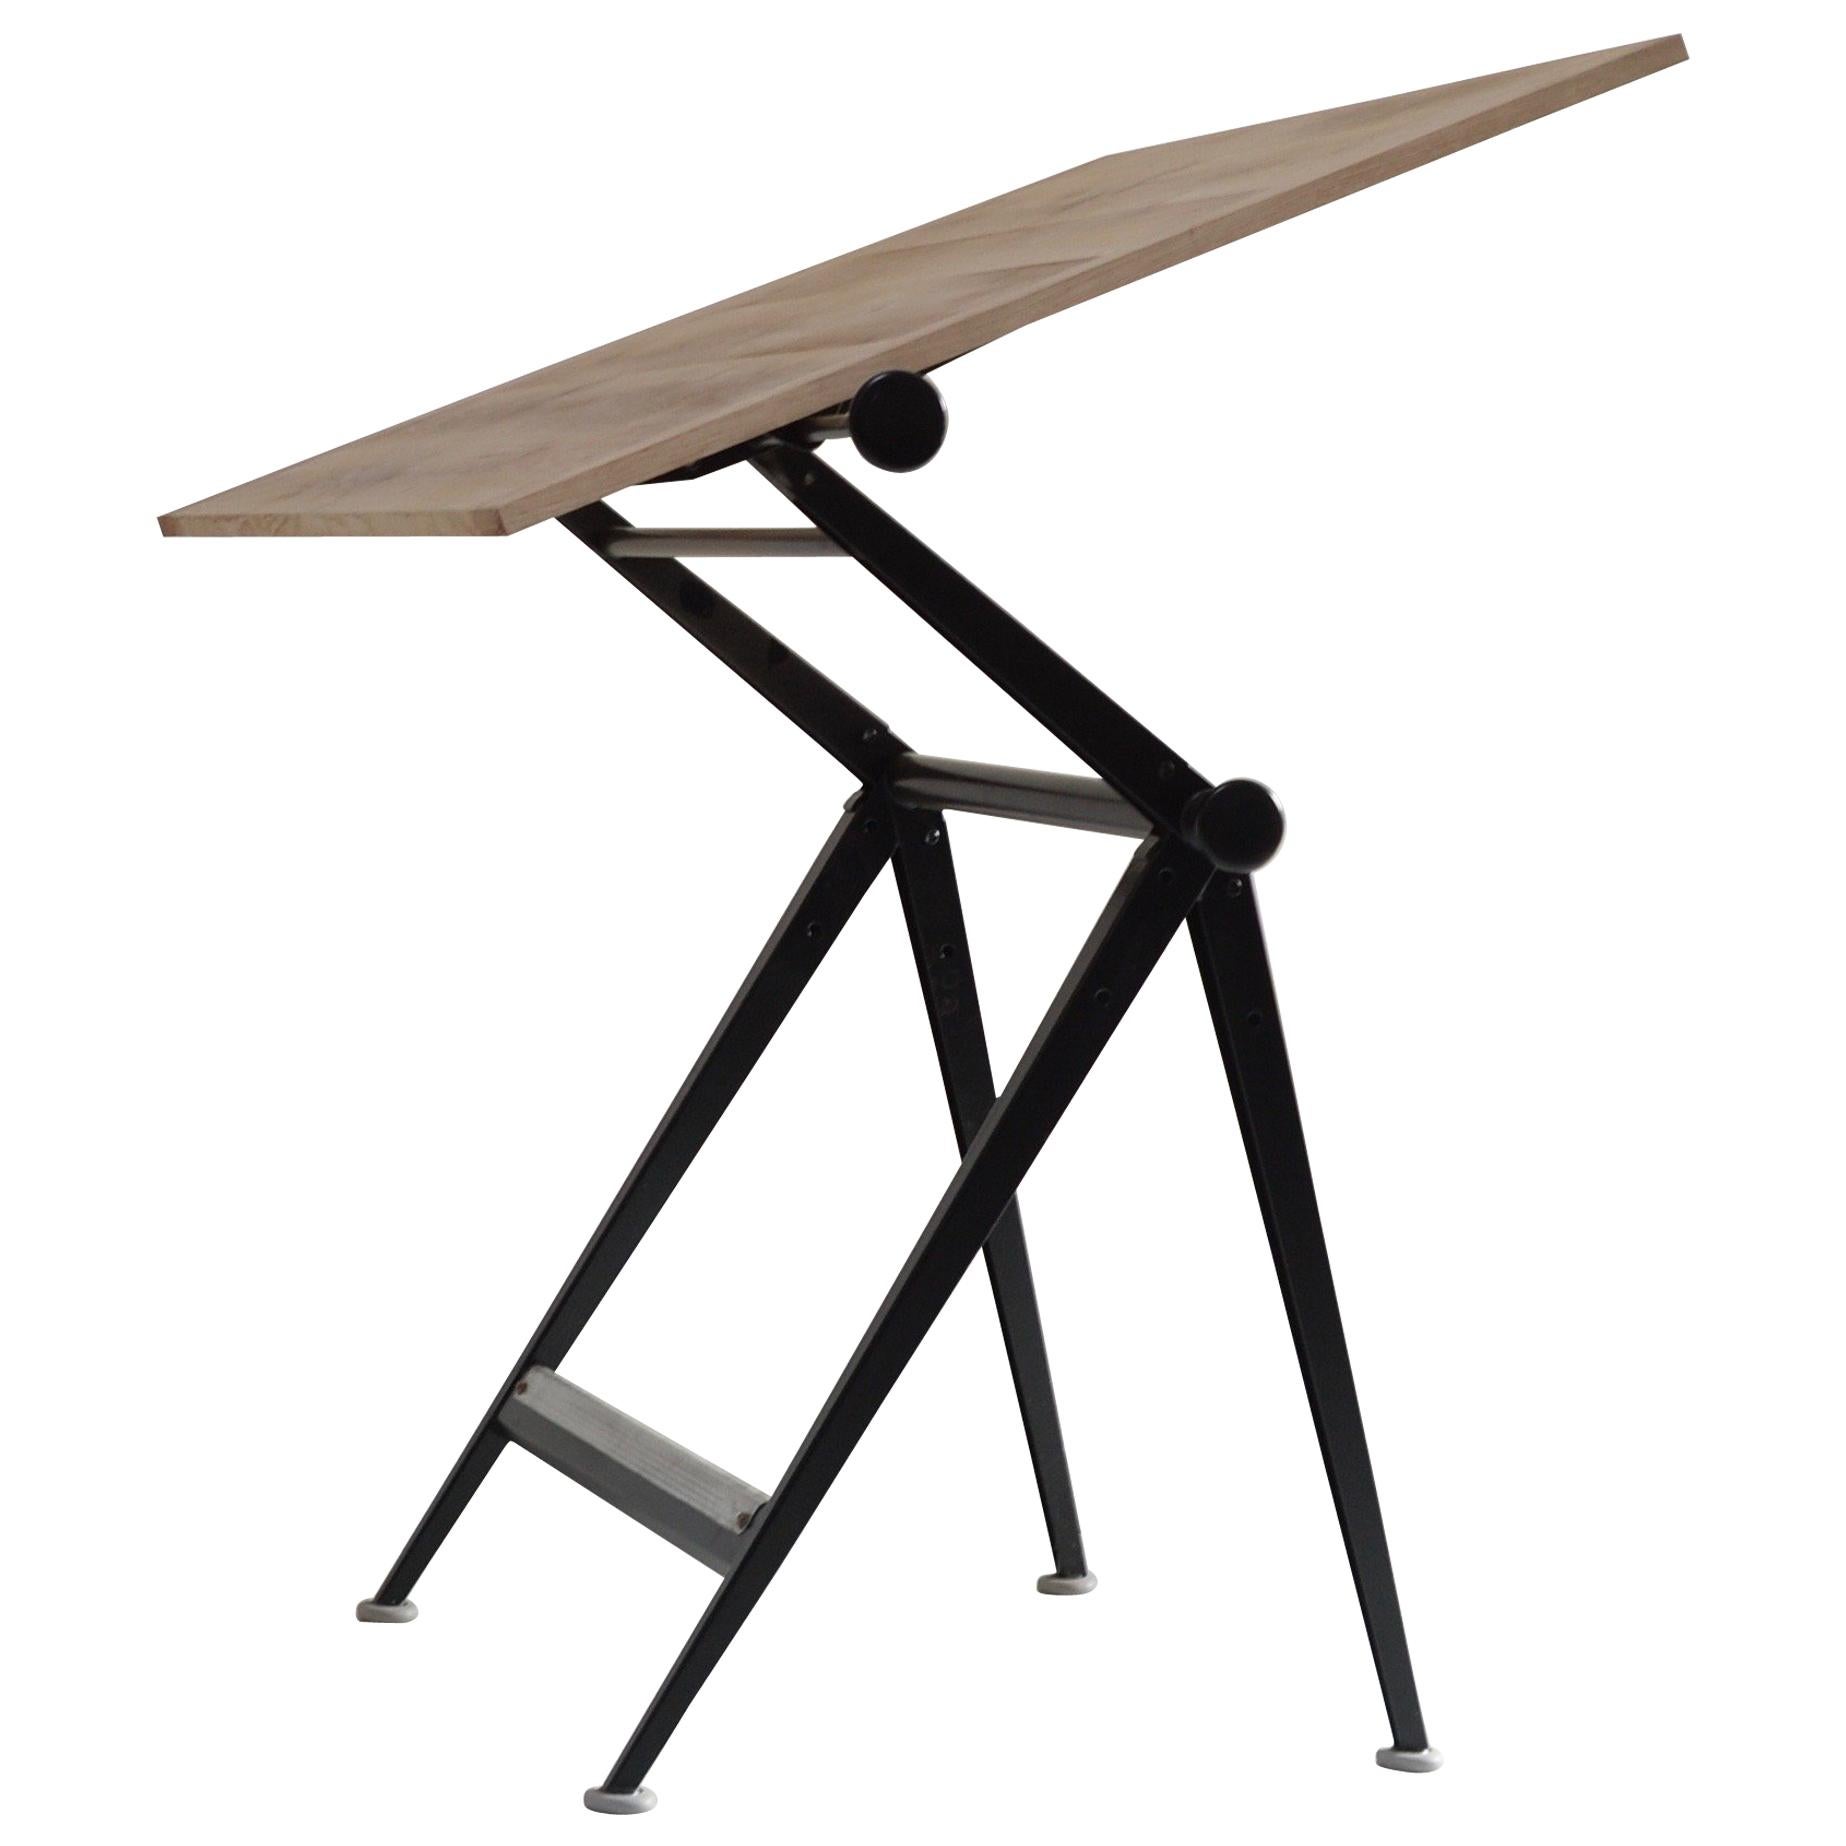 Drafting Table and Chair by Wim Rietveld and Friso Kramer